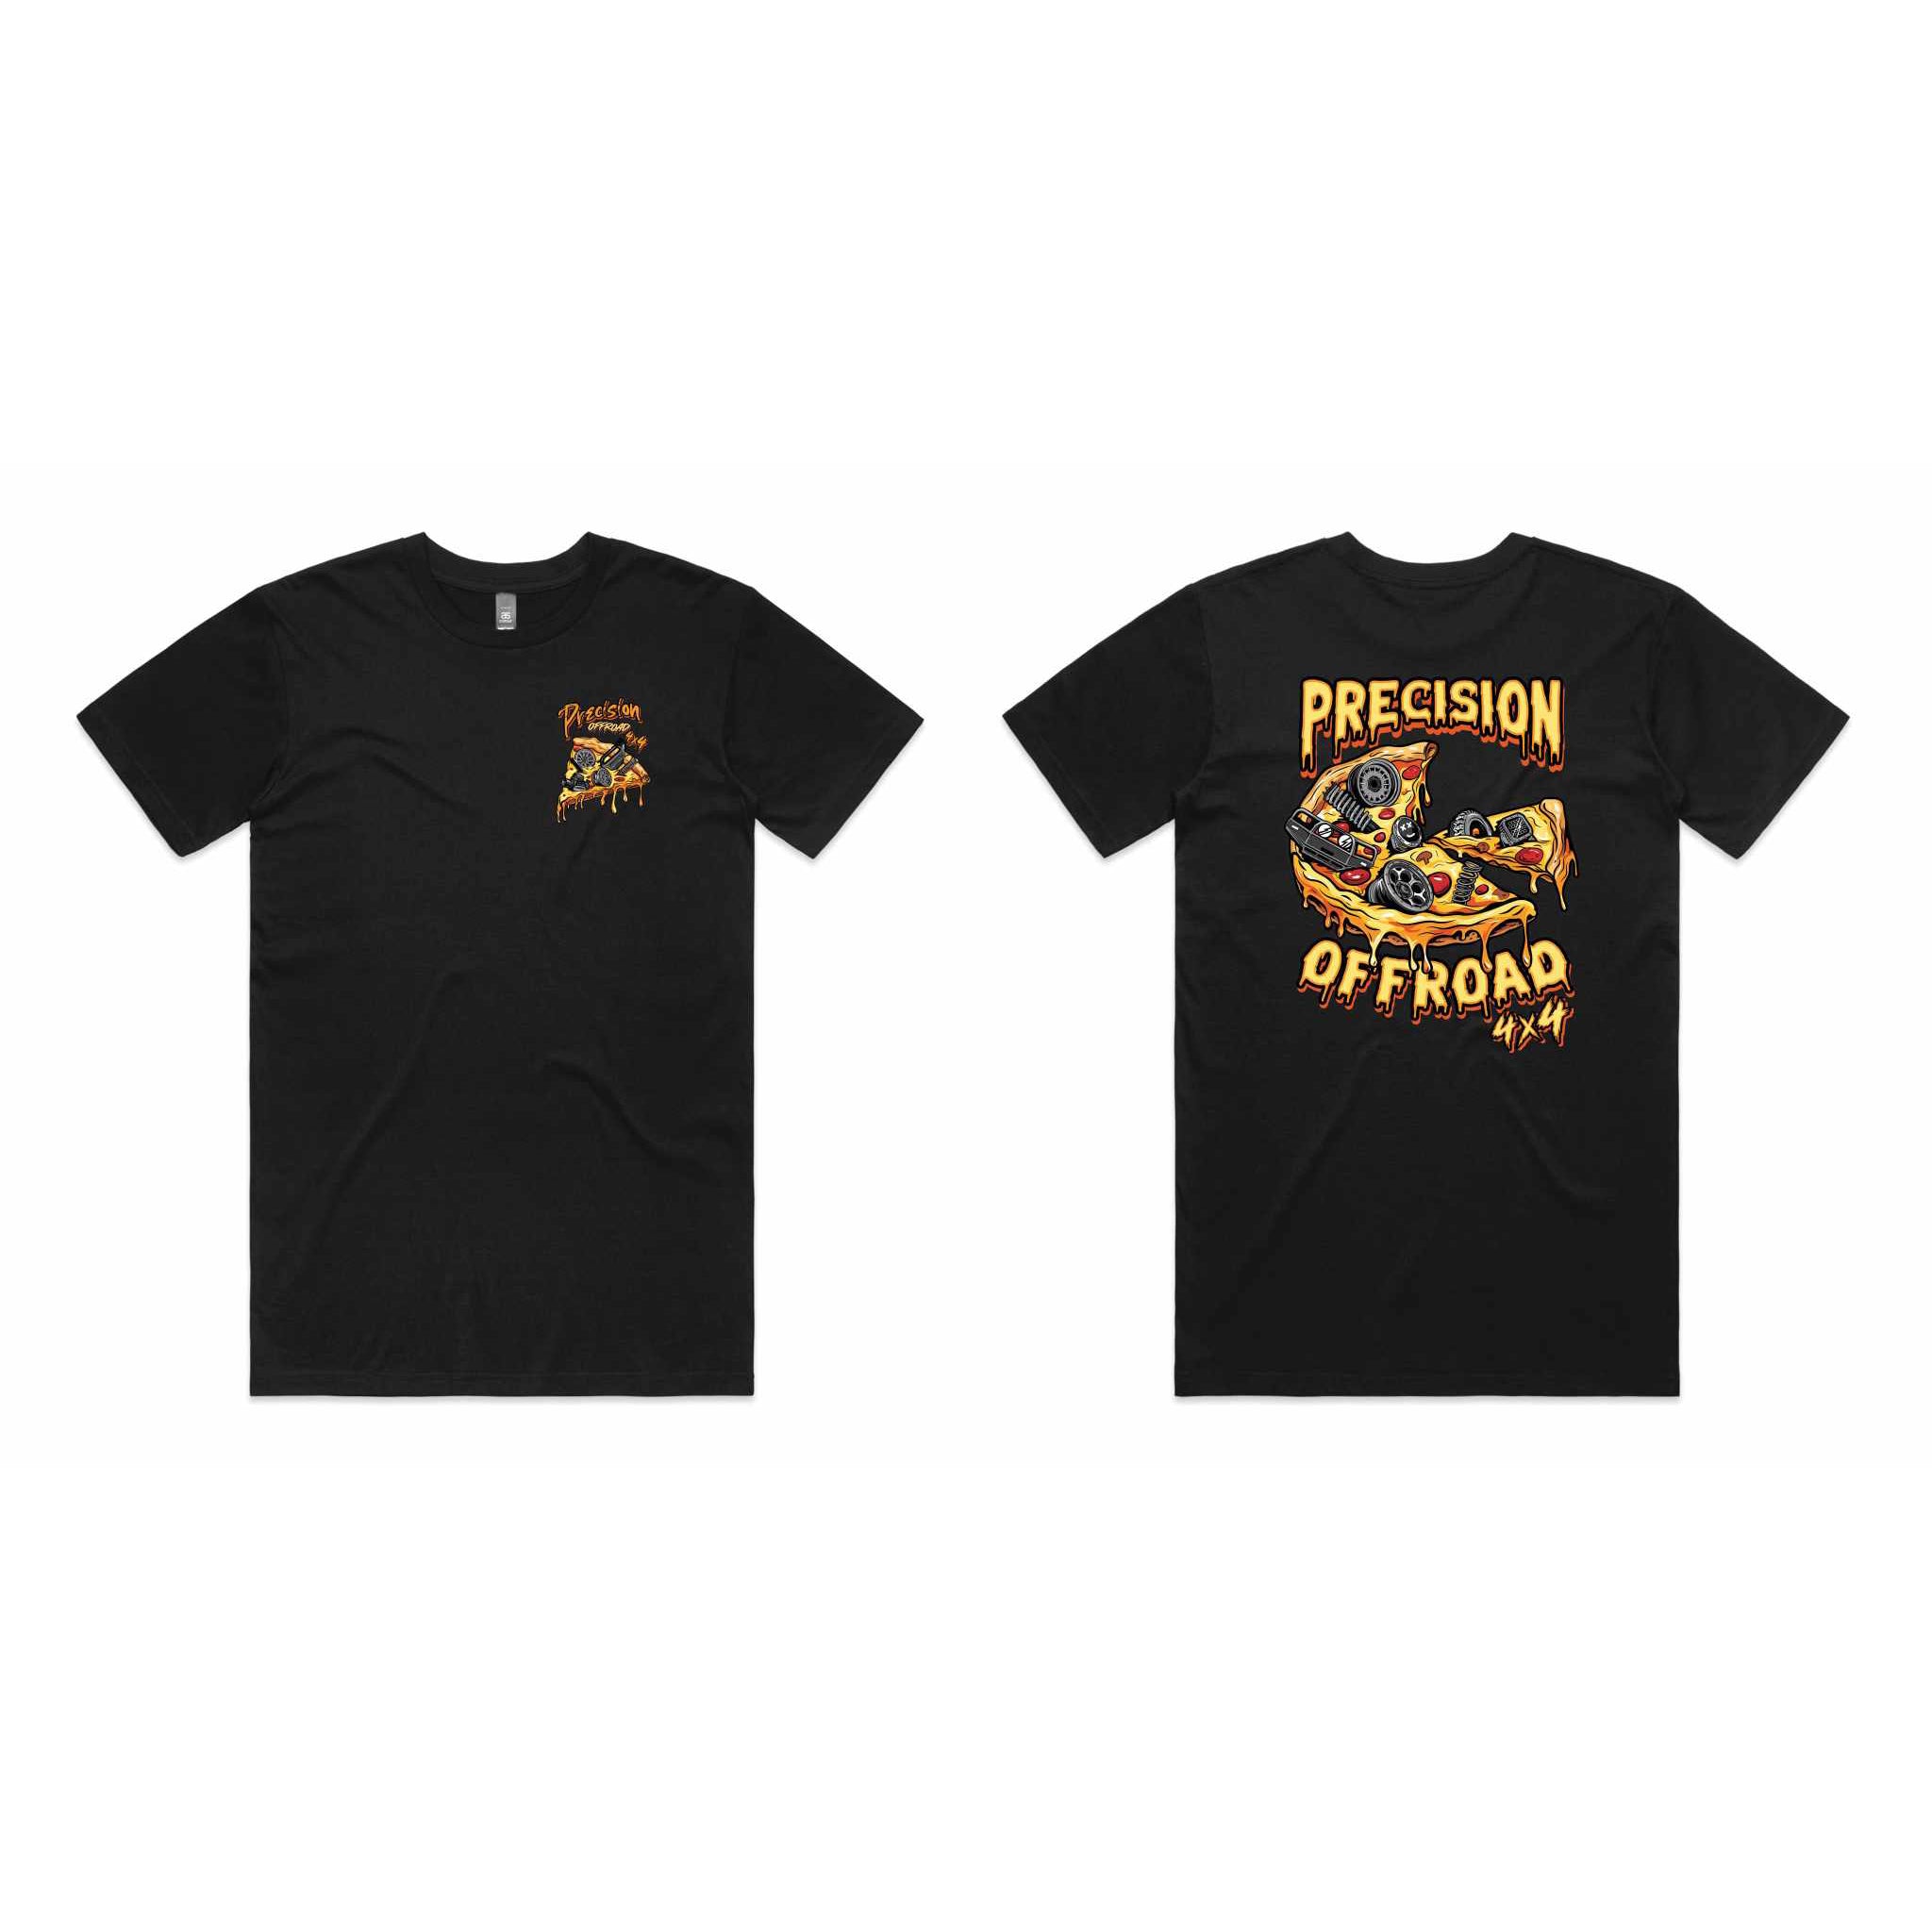 THE PIZZA TEE - BLACK EDITION